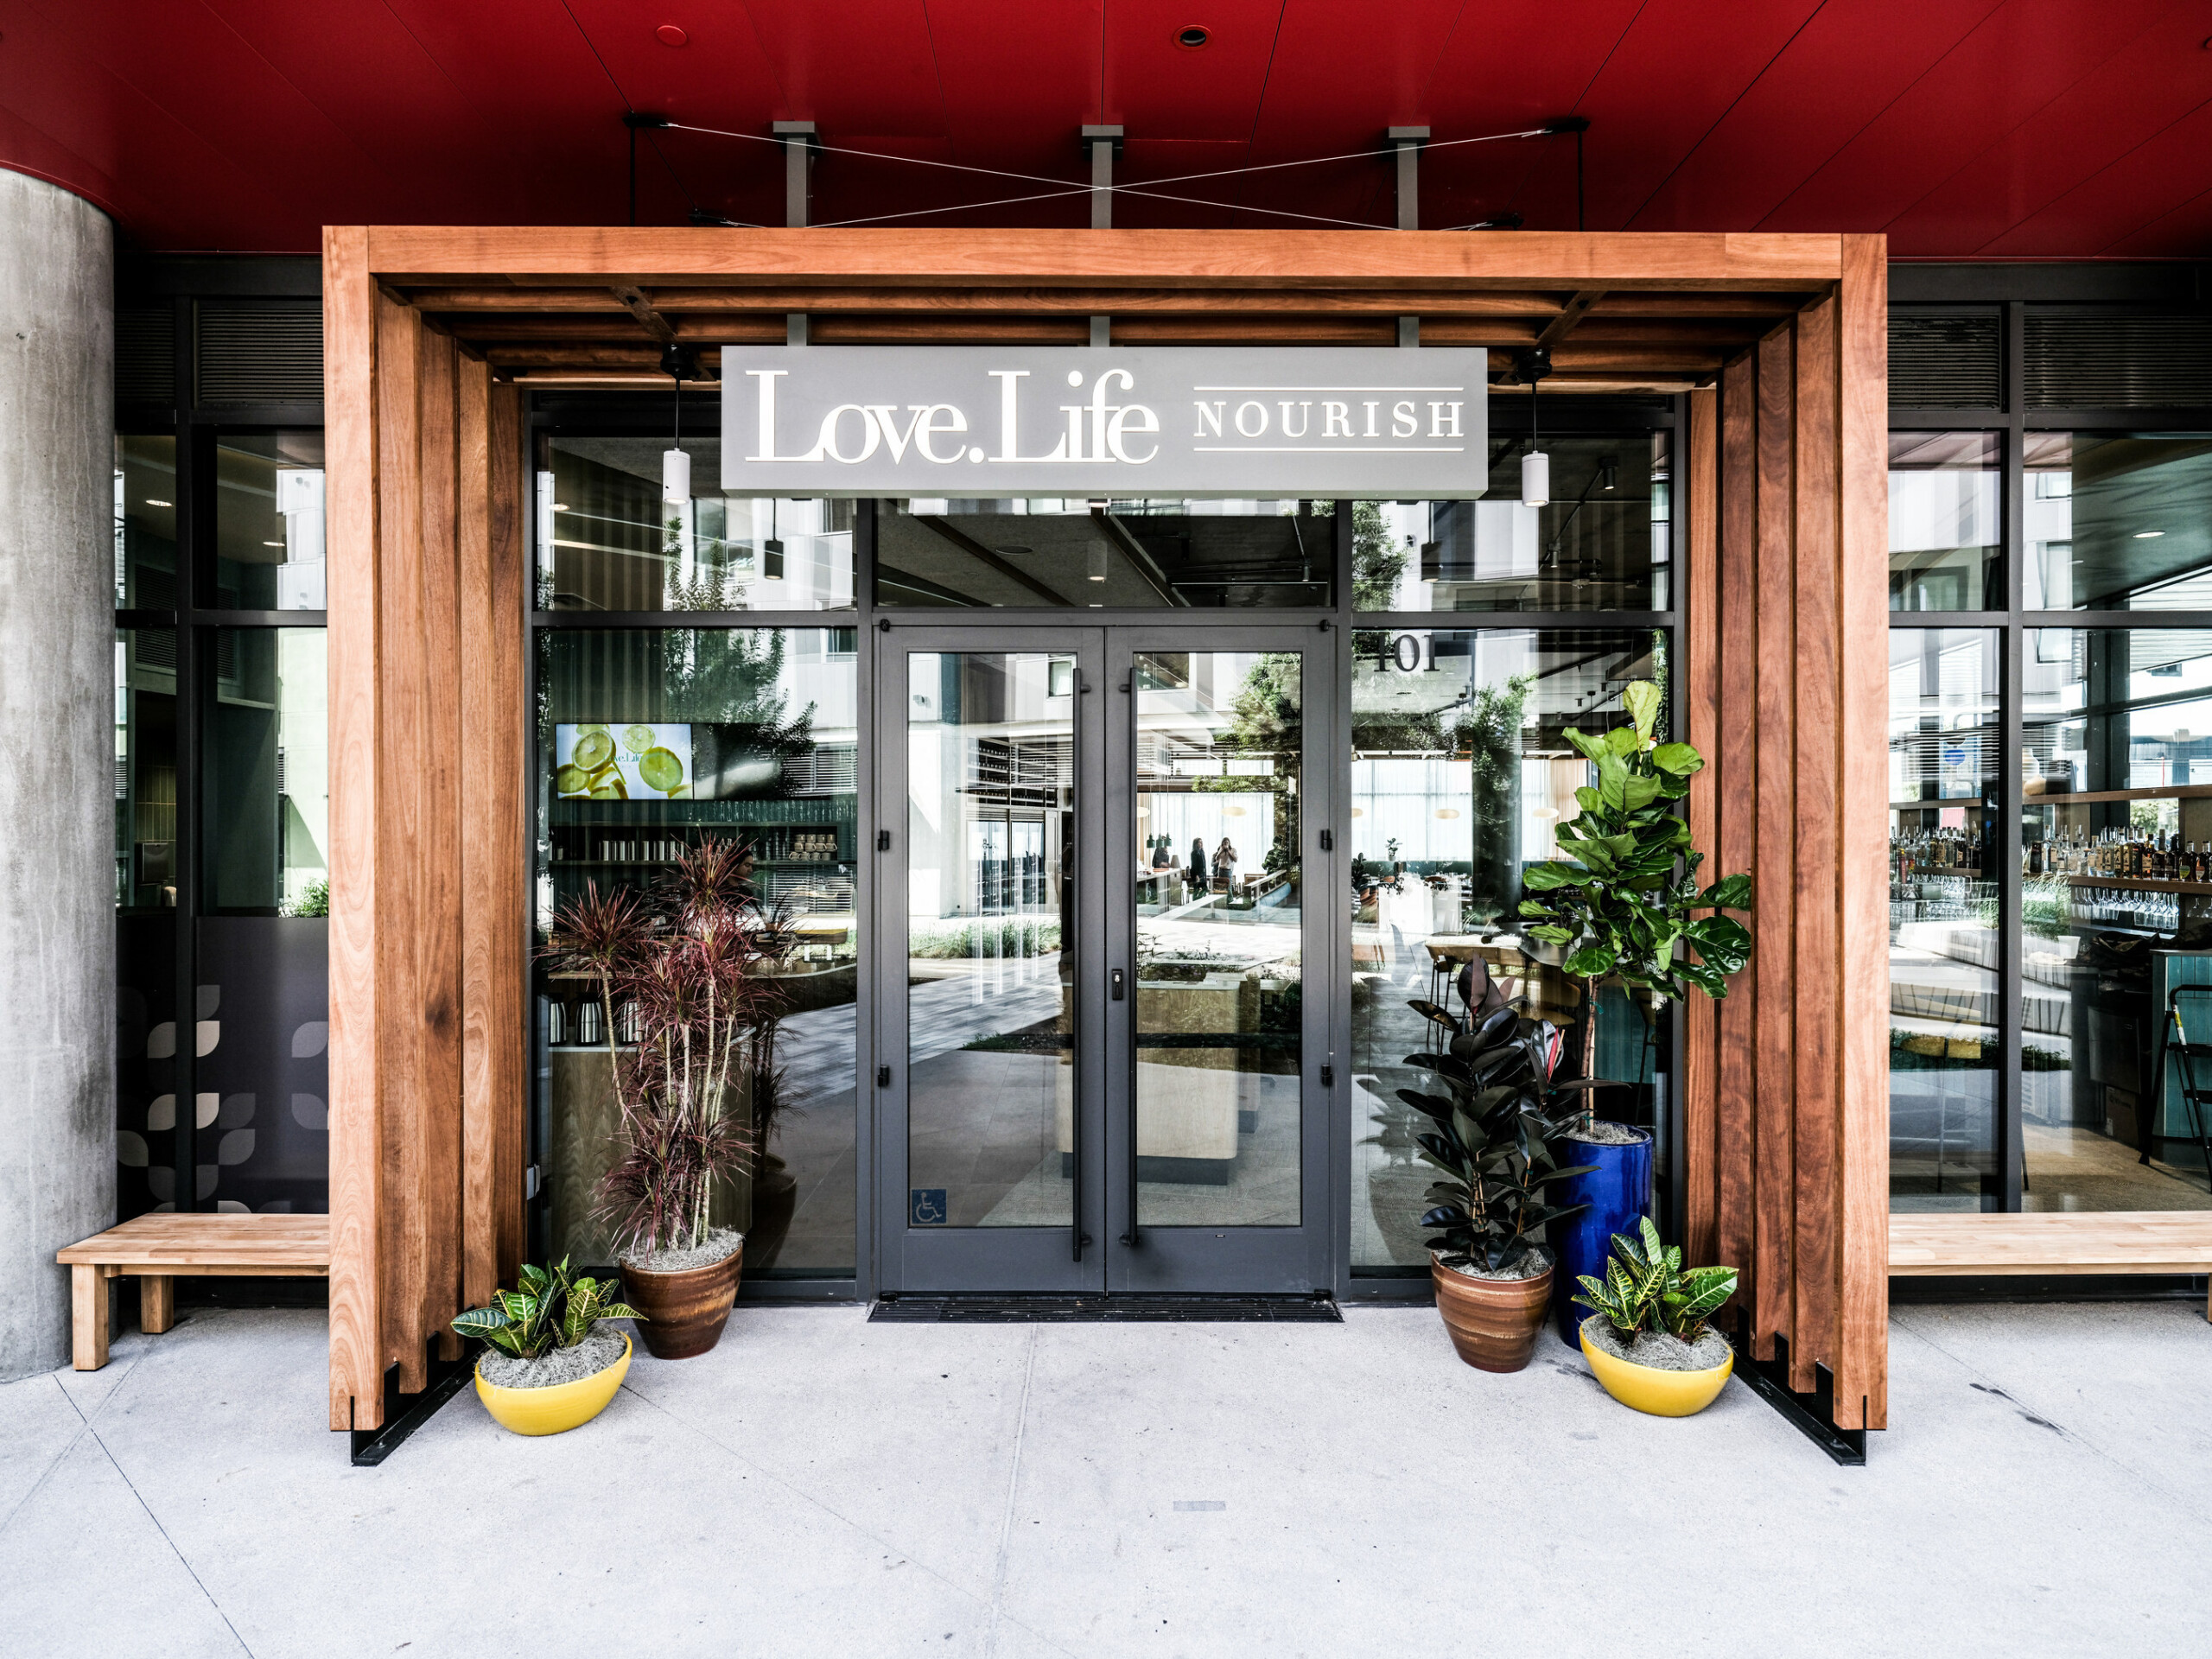 Love.Life Restaurant Opens in Los Angeles as Part of New Immersive Health & Wellness Brand